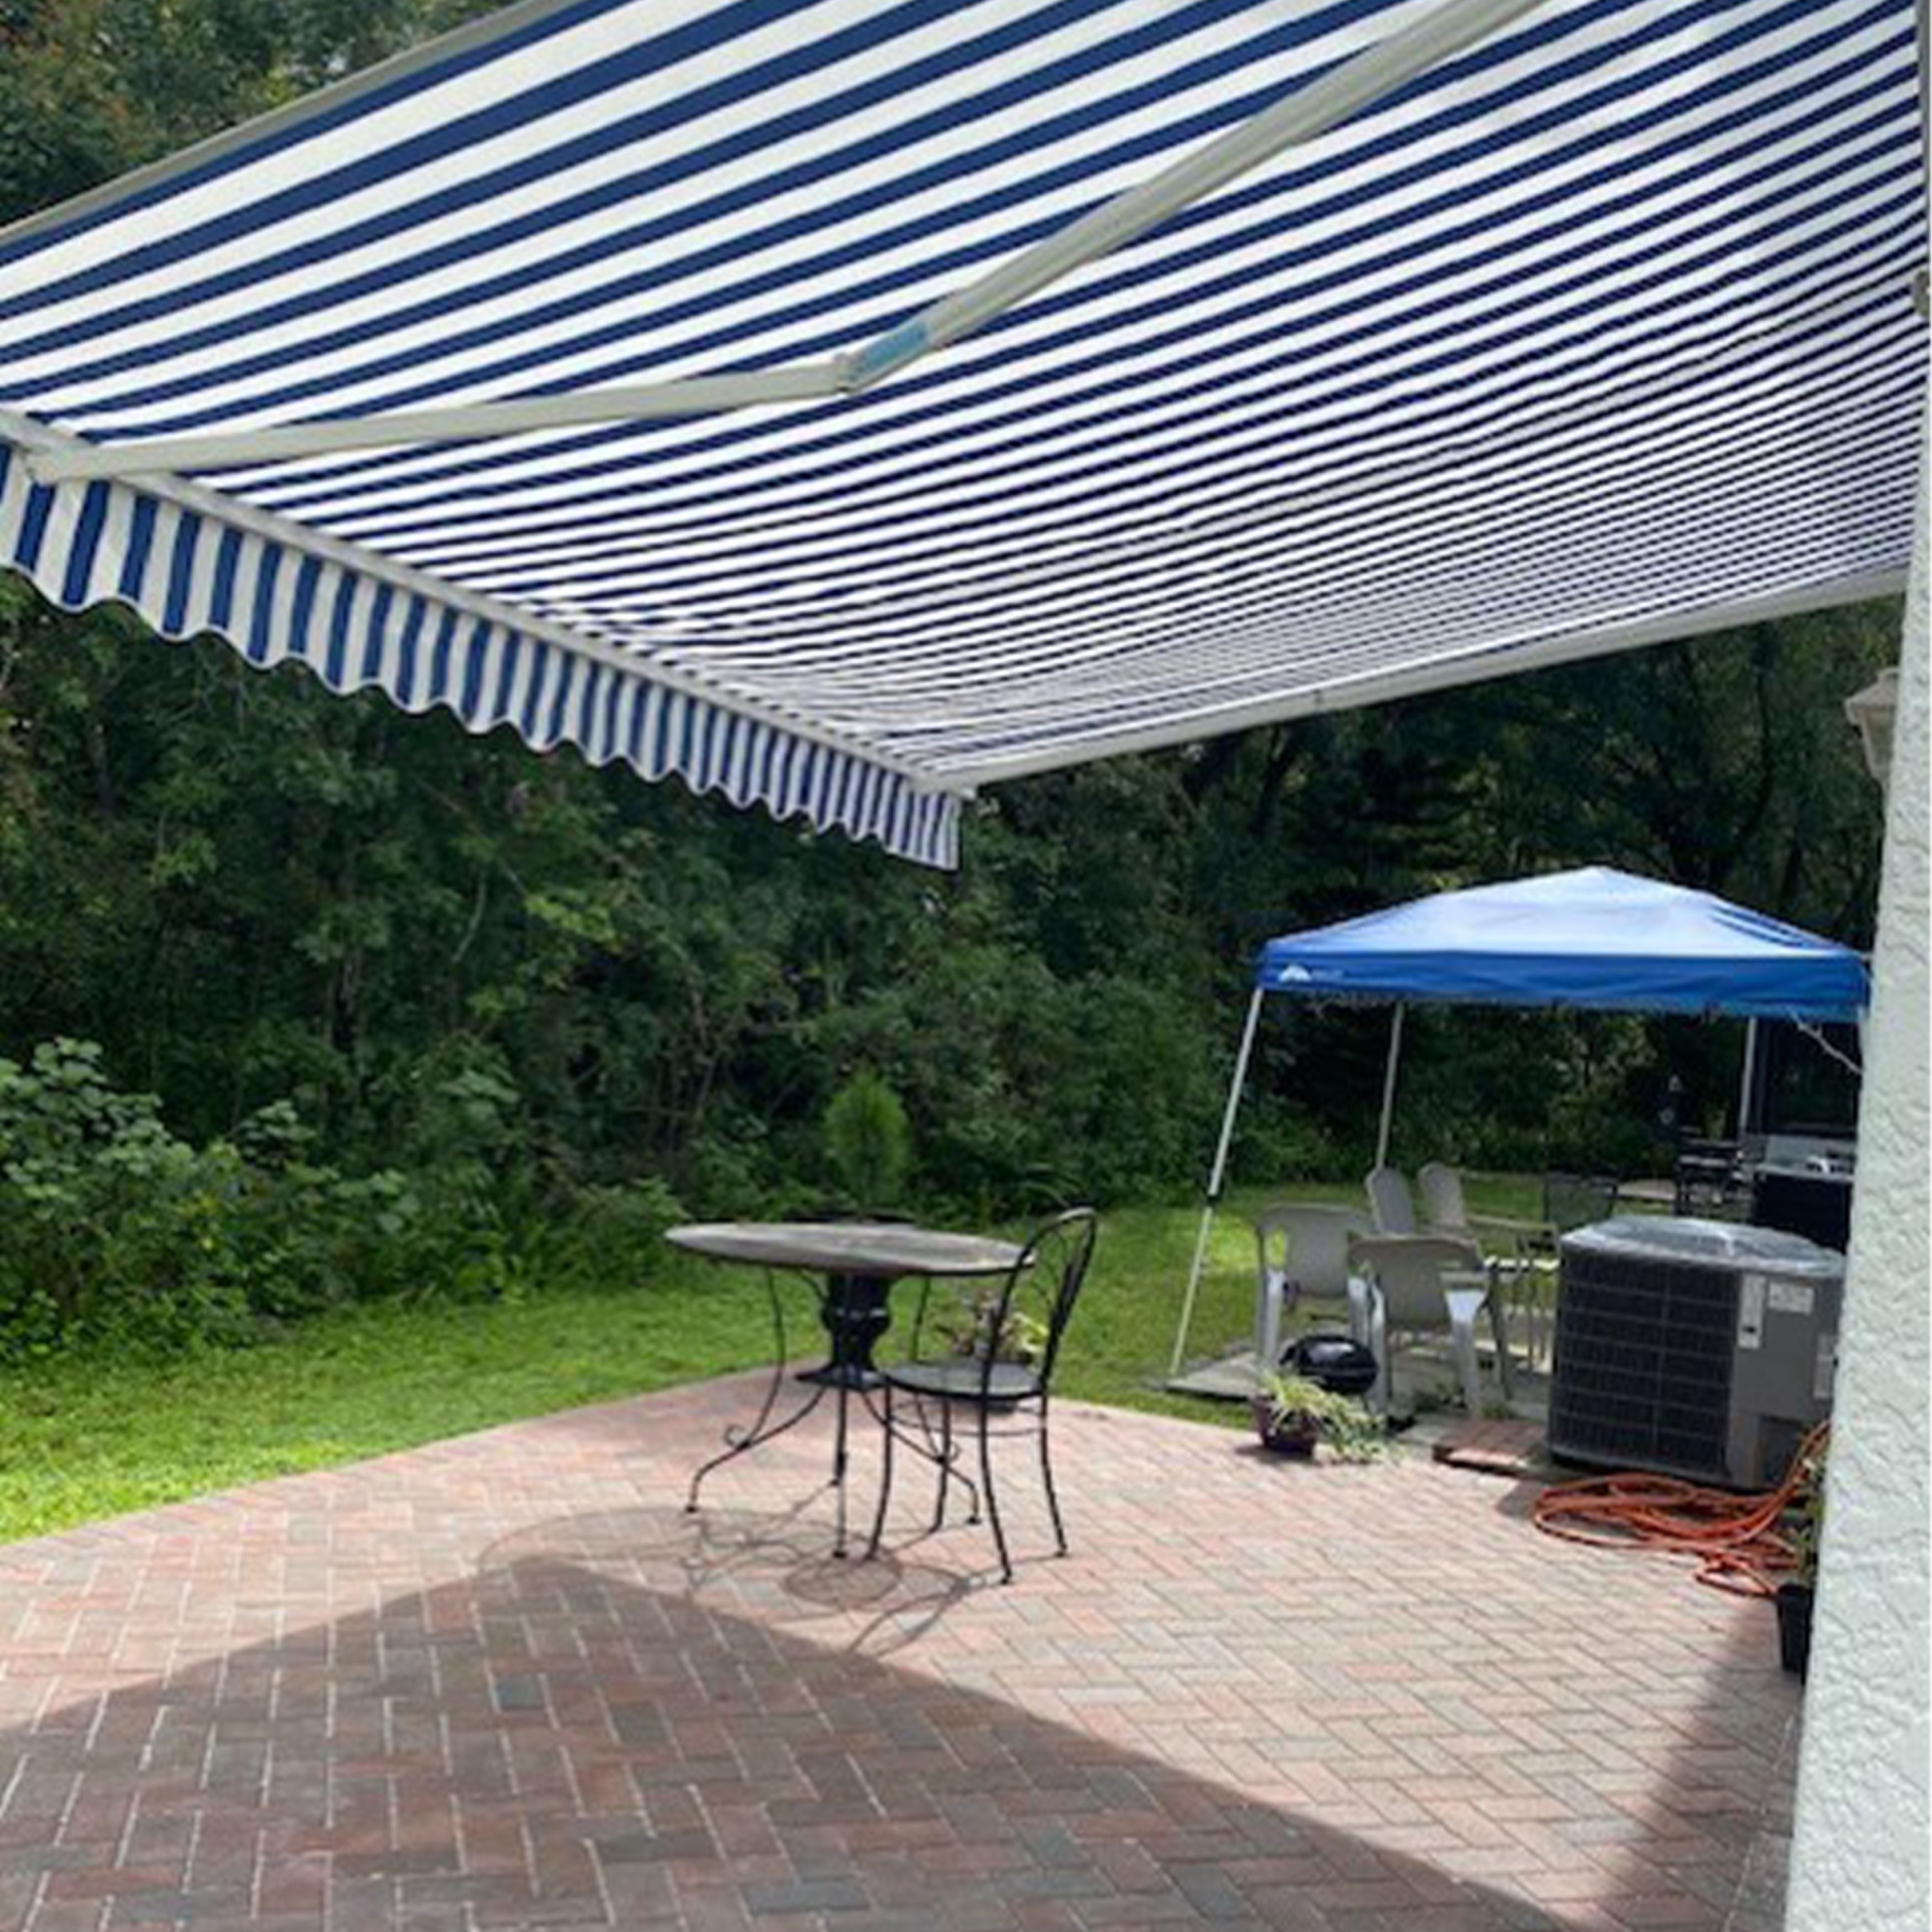 ALEKO Fabric Replacement For 16x10 Ft Retractable Awning Blue and White Color 